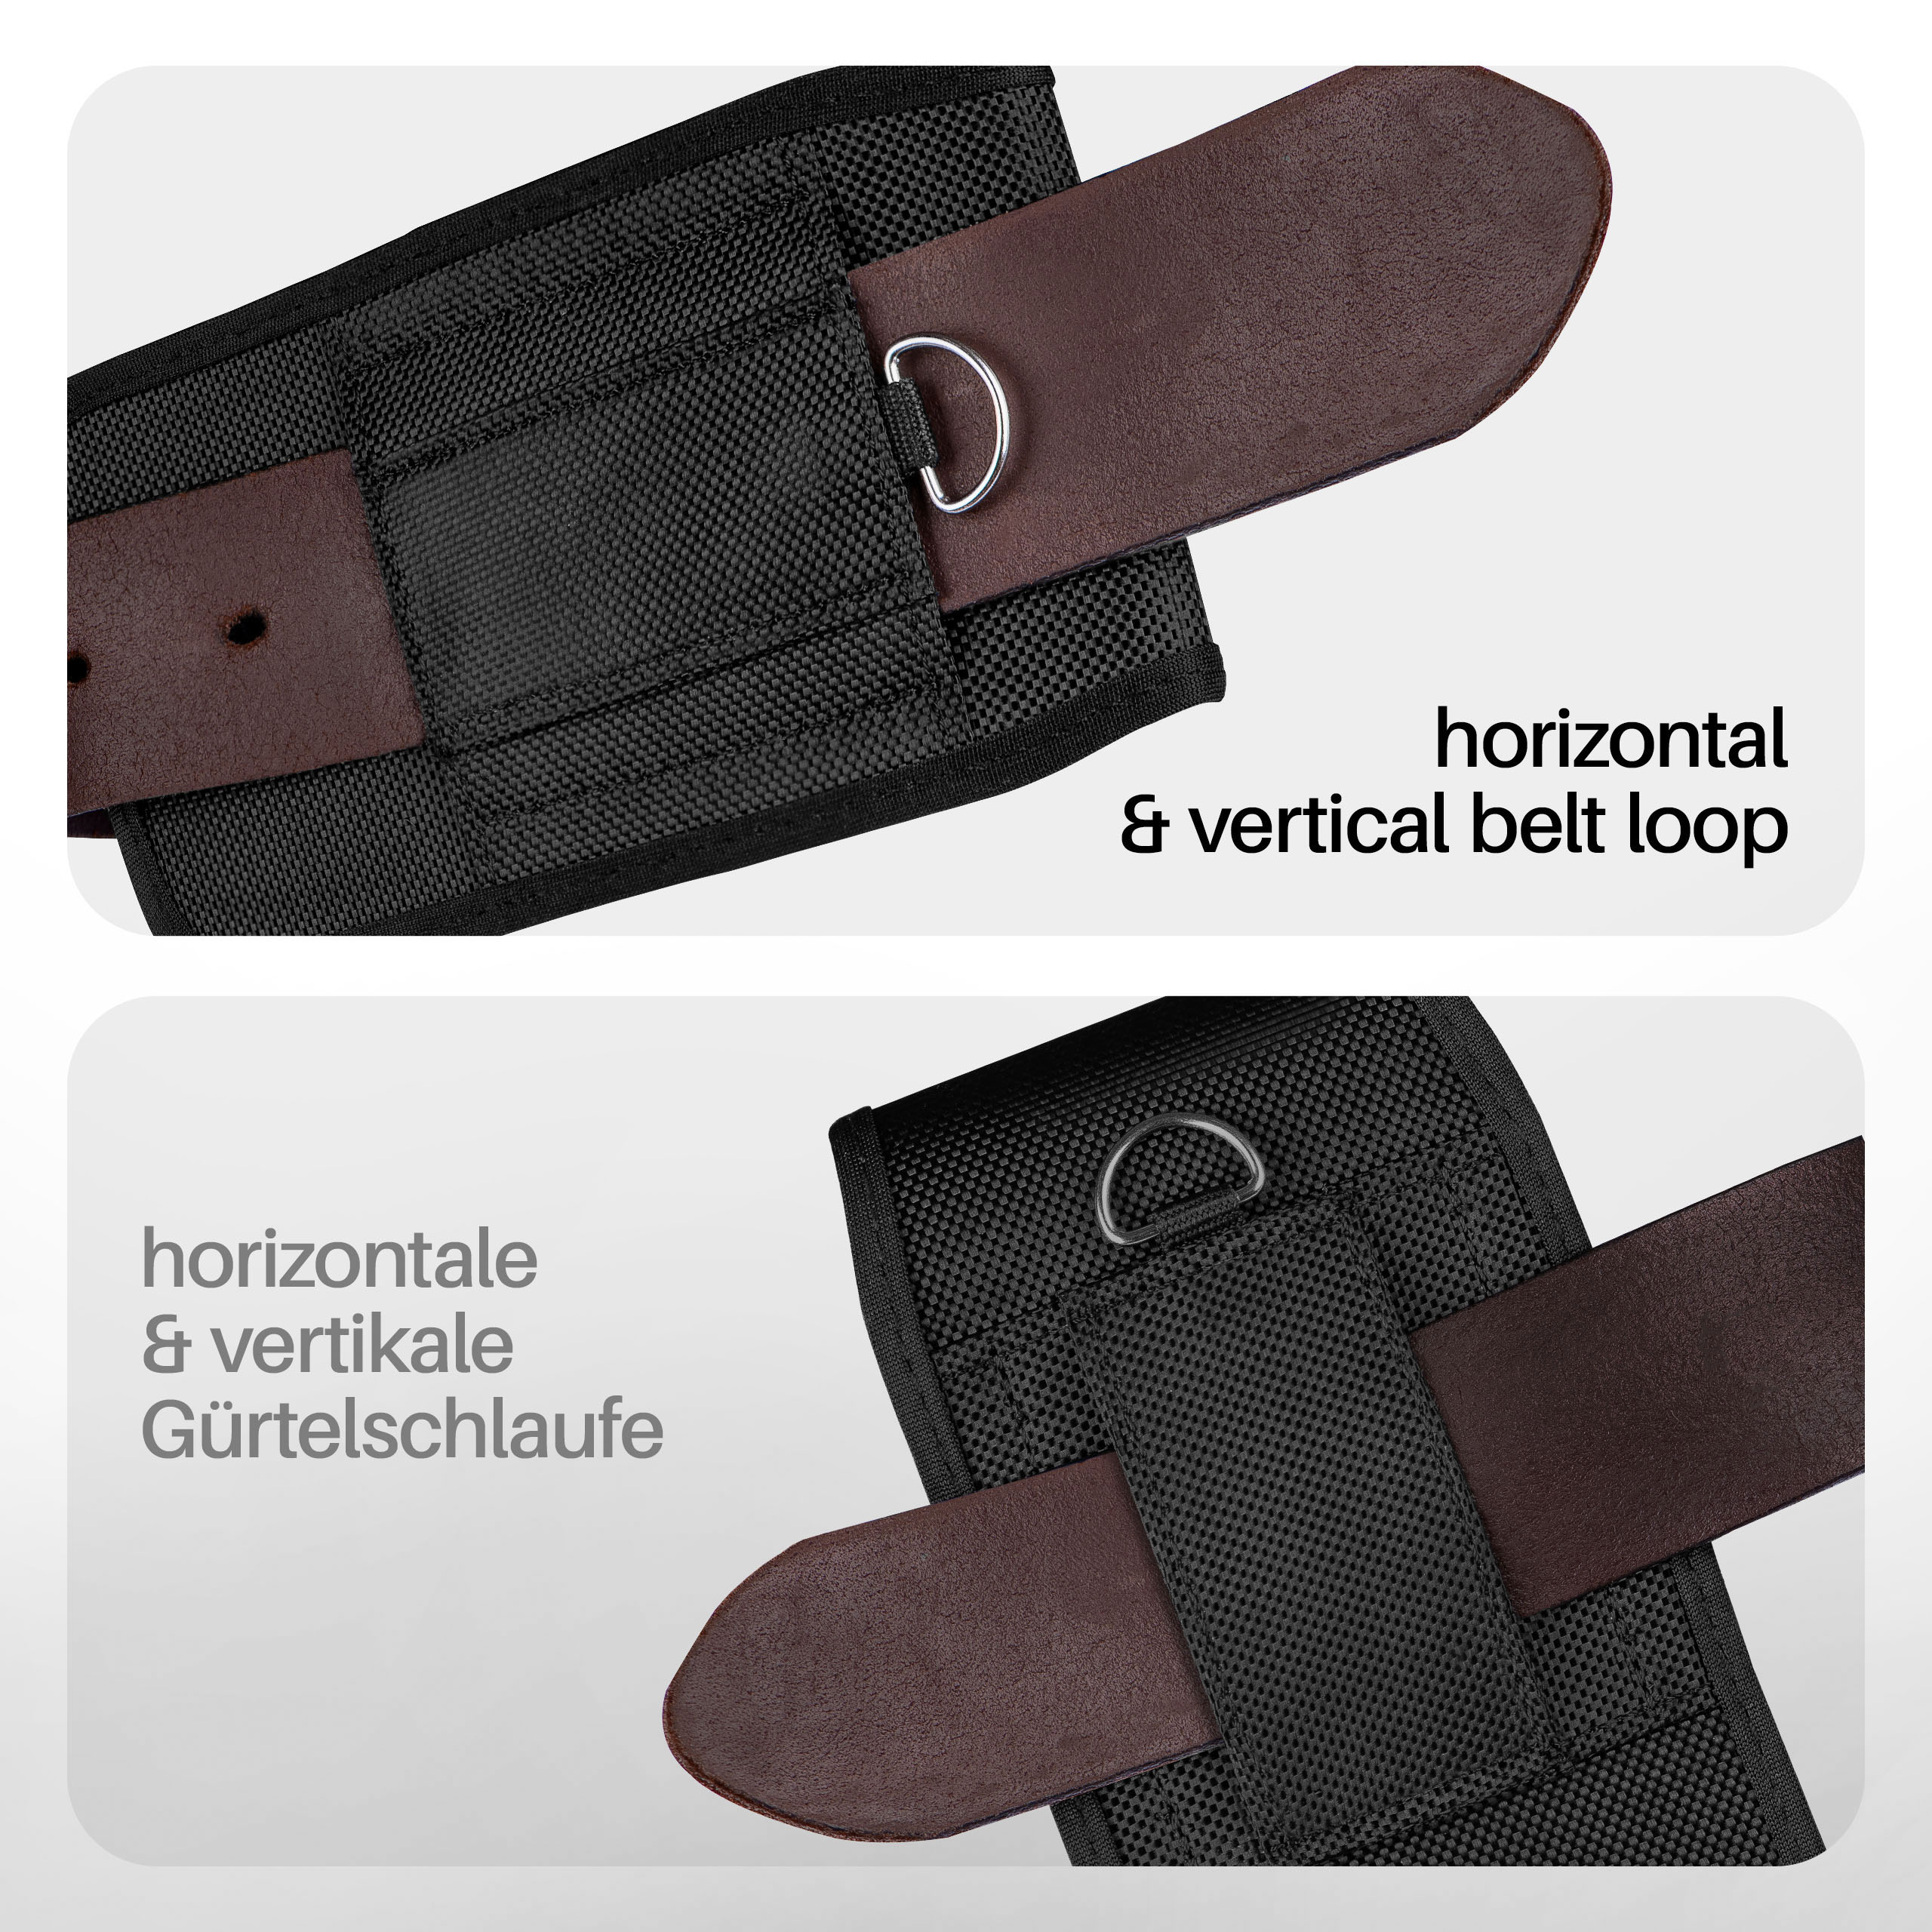 MOEX Agility Nord Holster, Case, Trail OnePlus, N100